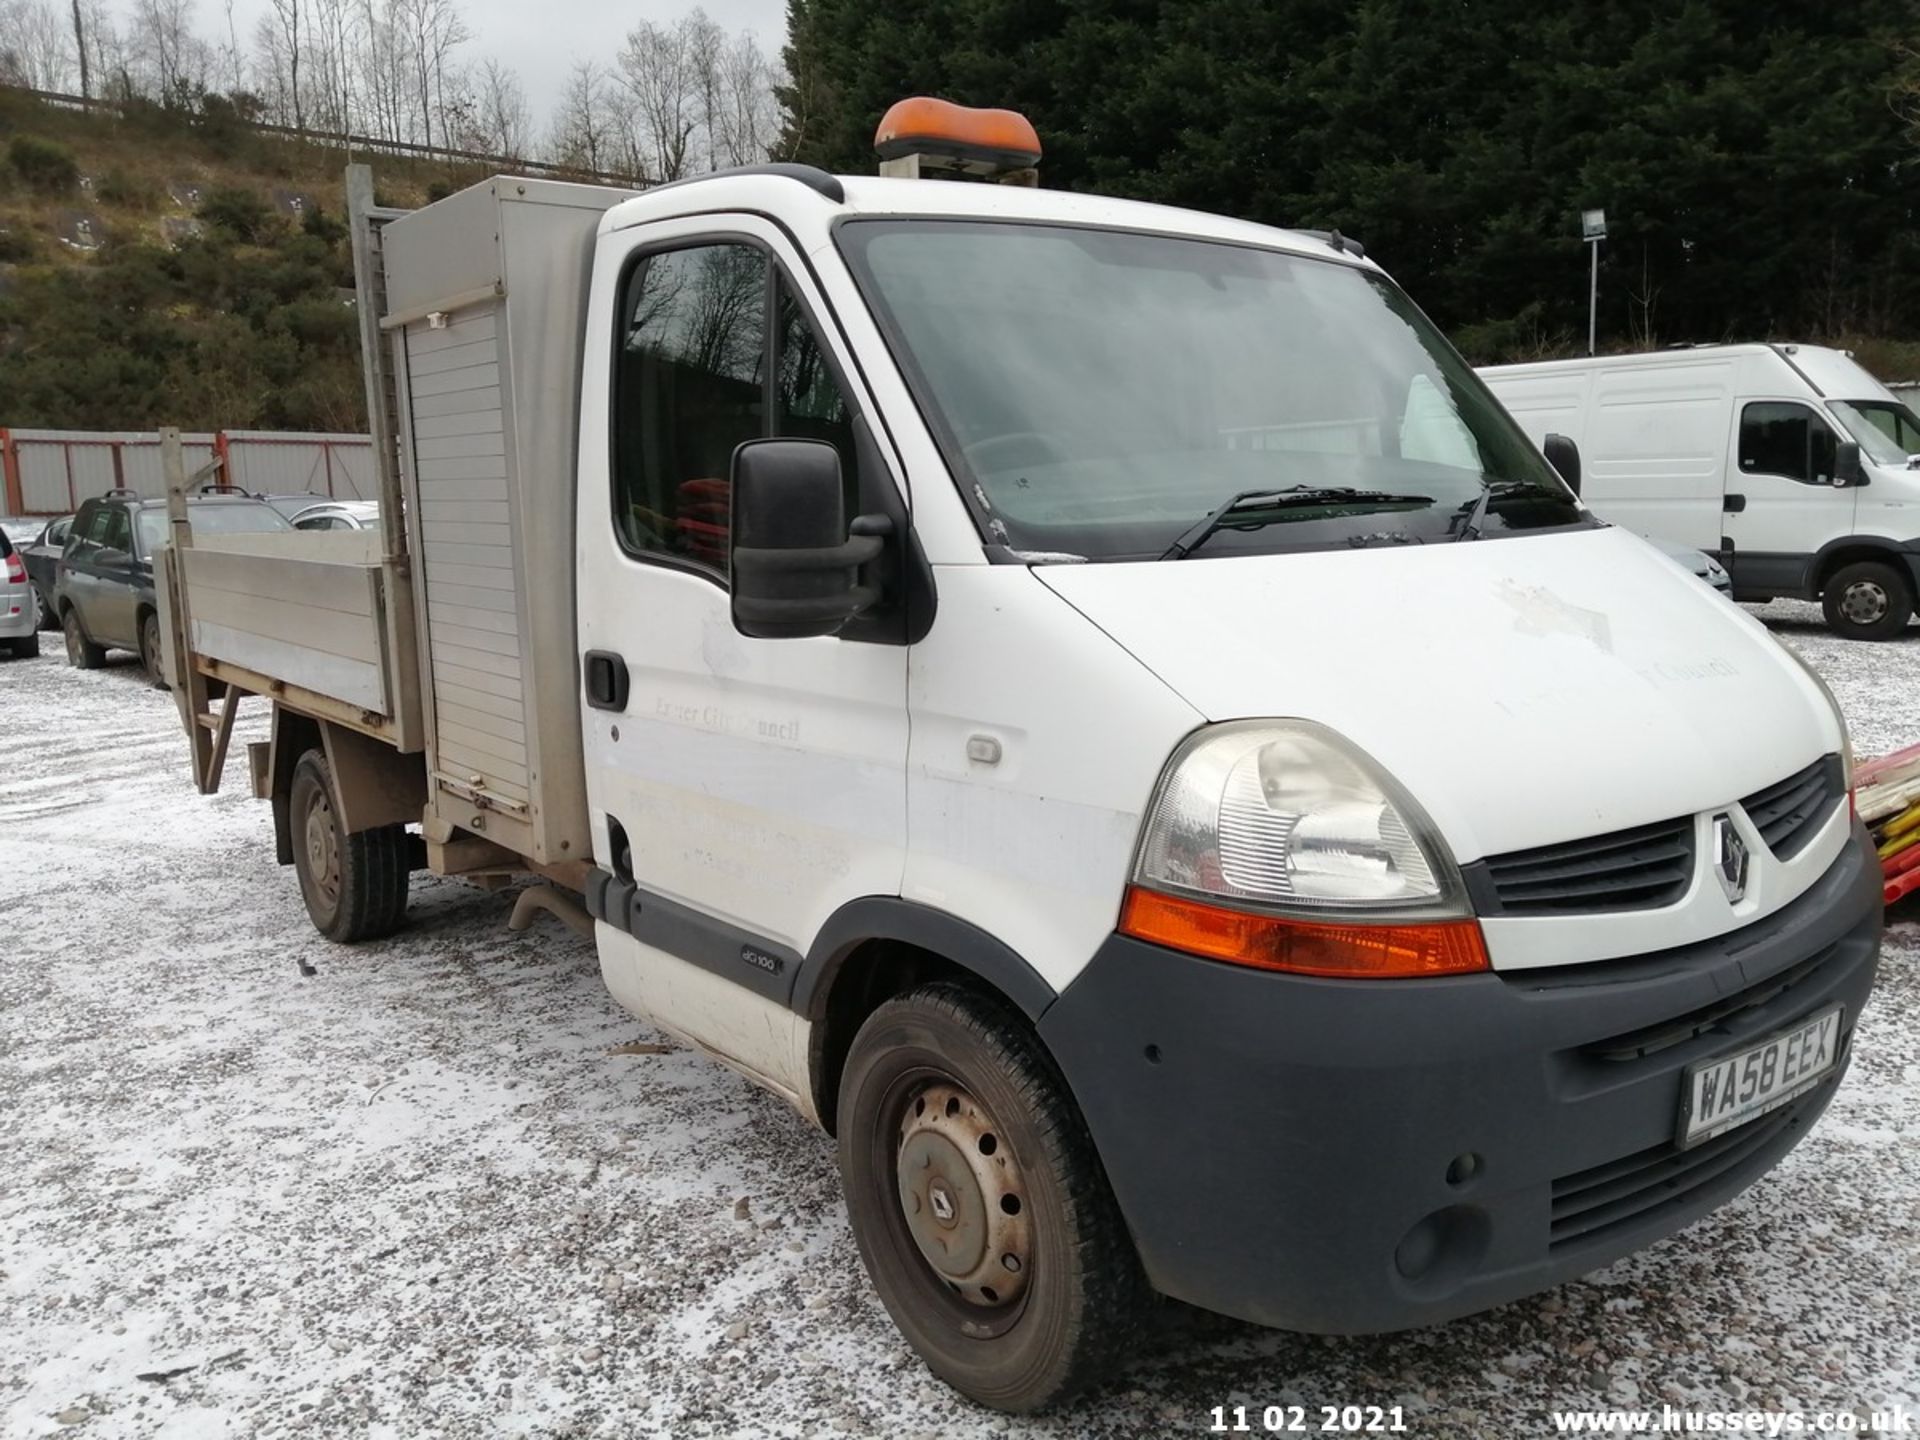 08/58 RENAULT MASTER ML35 DCI 100 - 2464cc 2dr Tipper (White, 48k) - Image 8 of 11